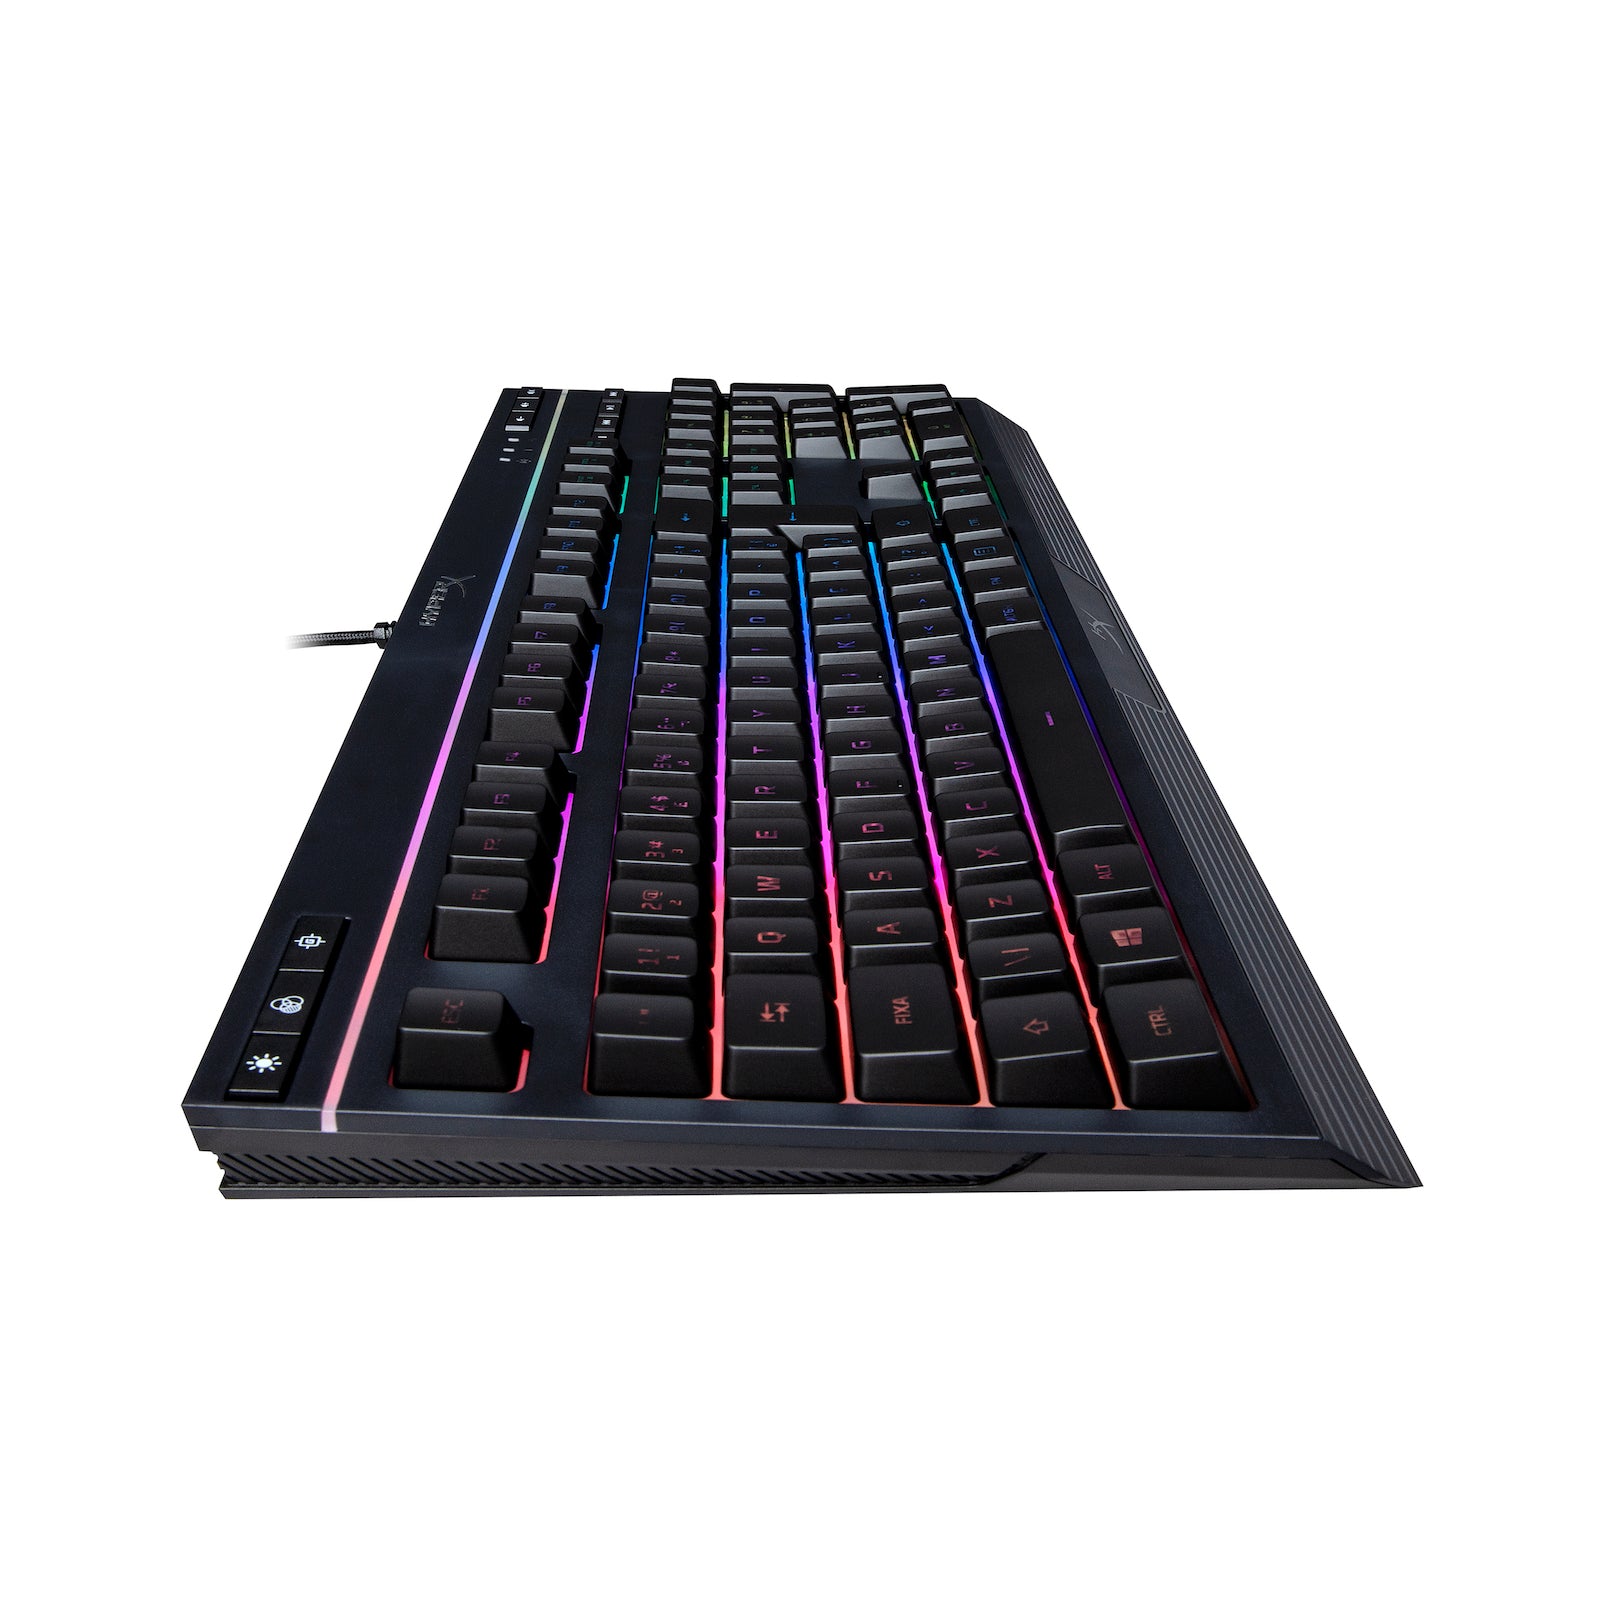 Side view of the HyperX Alloy Core RGB gaming keyboard